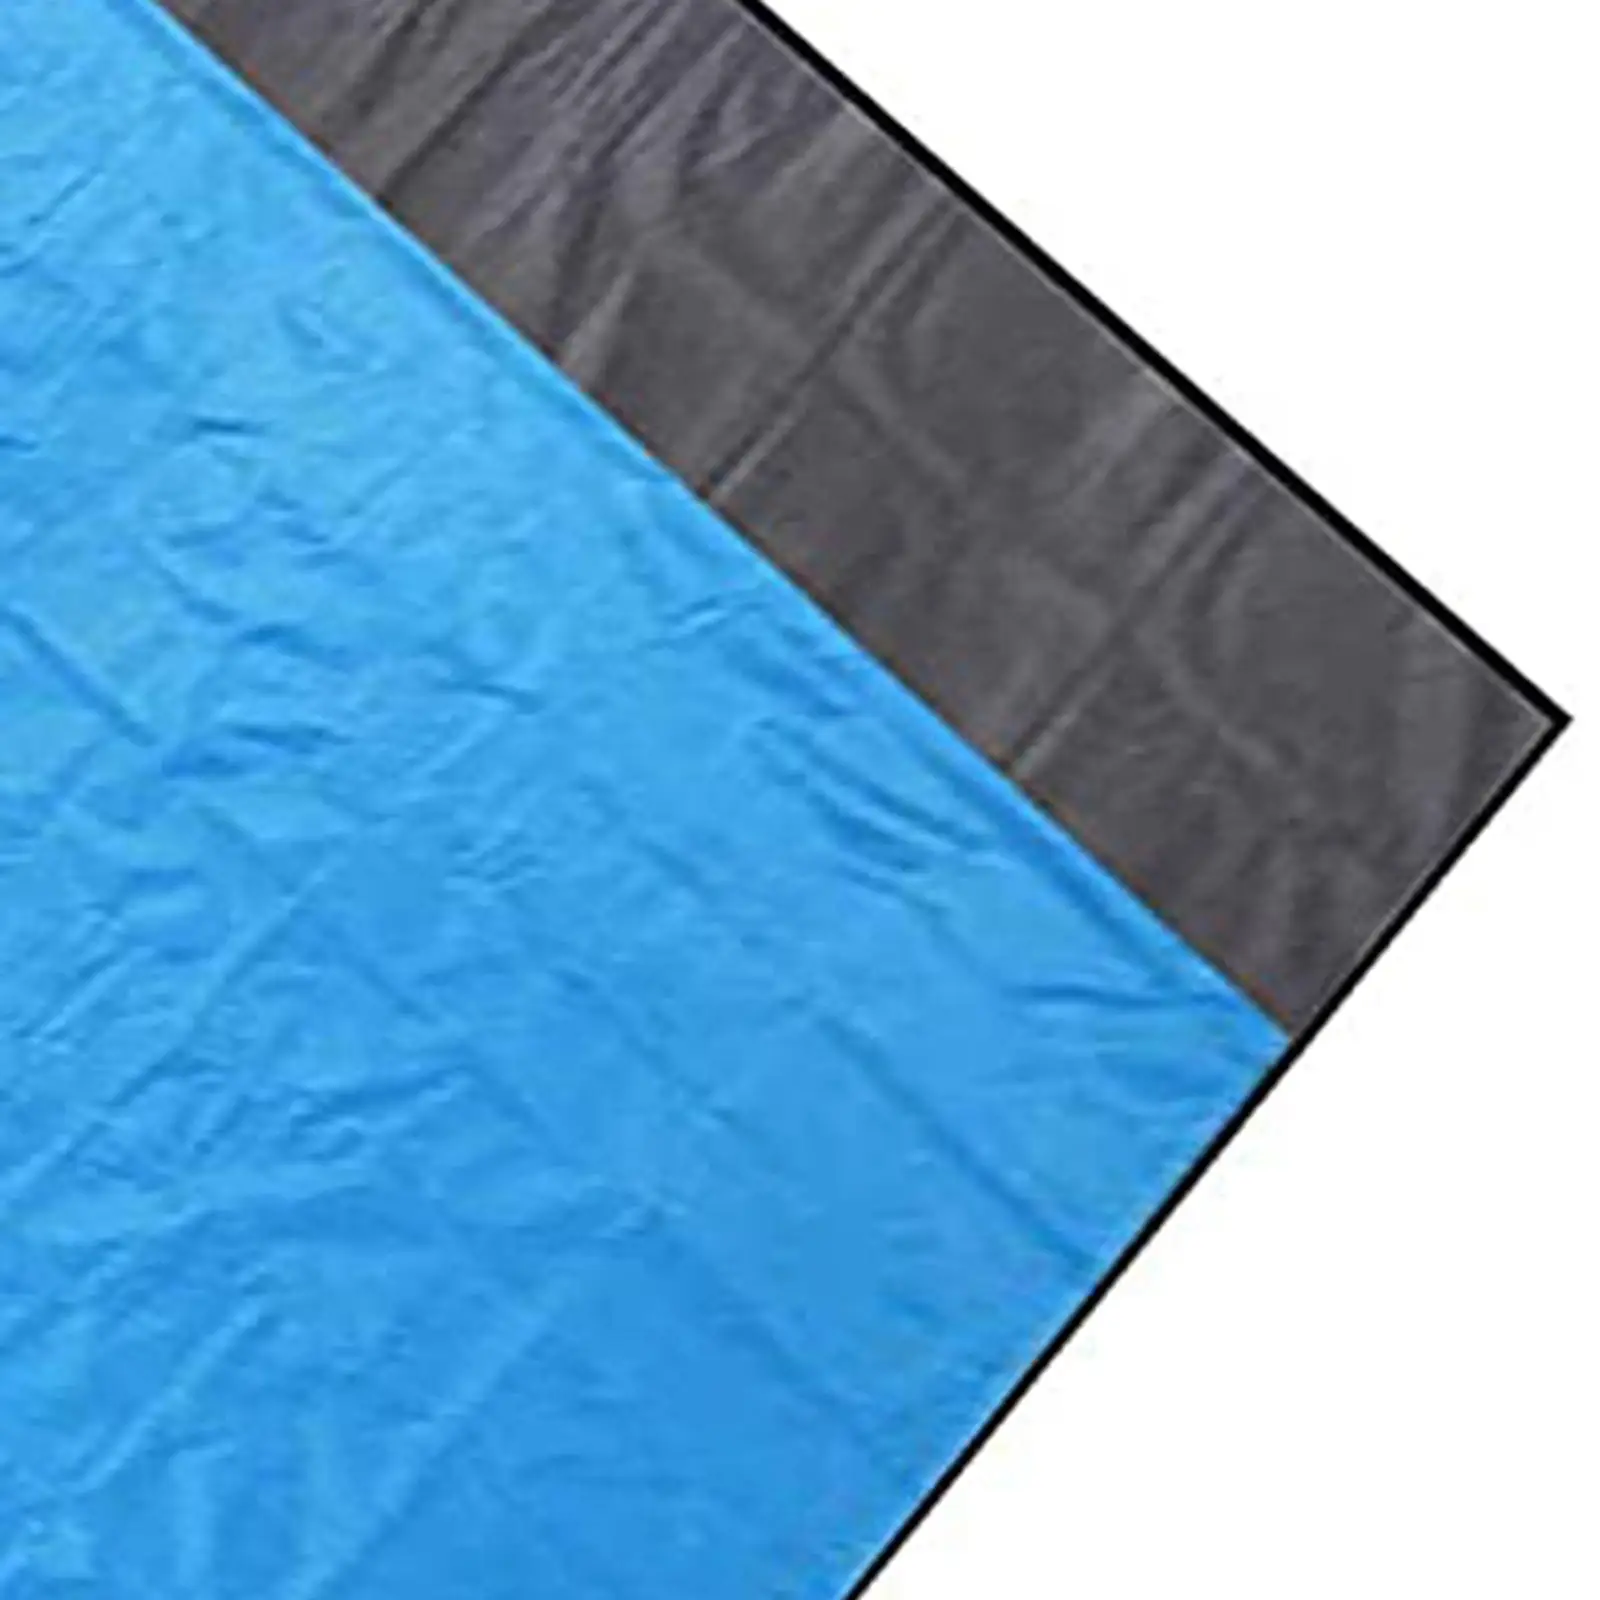  Lightweight Fast Drying Nylon Picnic Mat for Camping Hiking